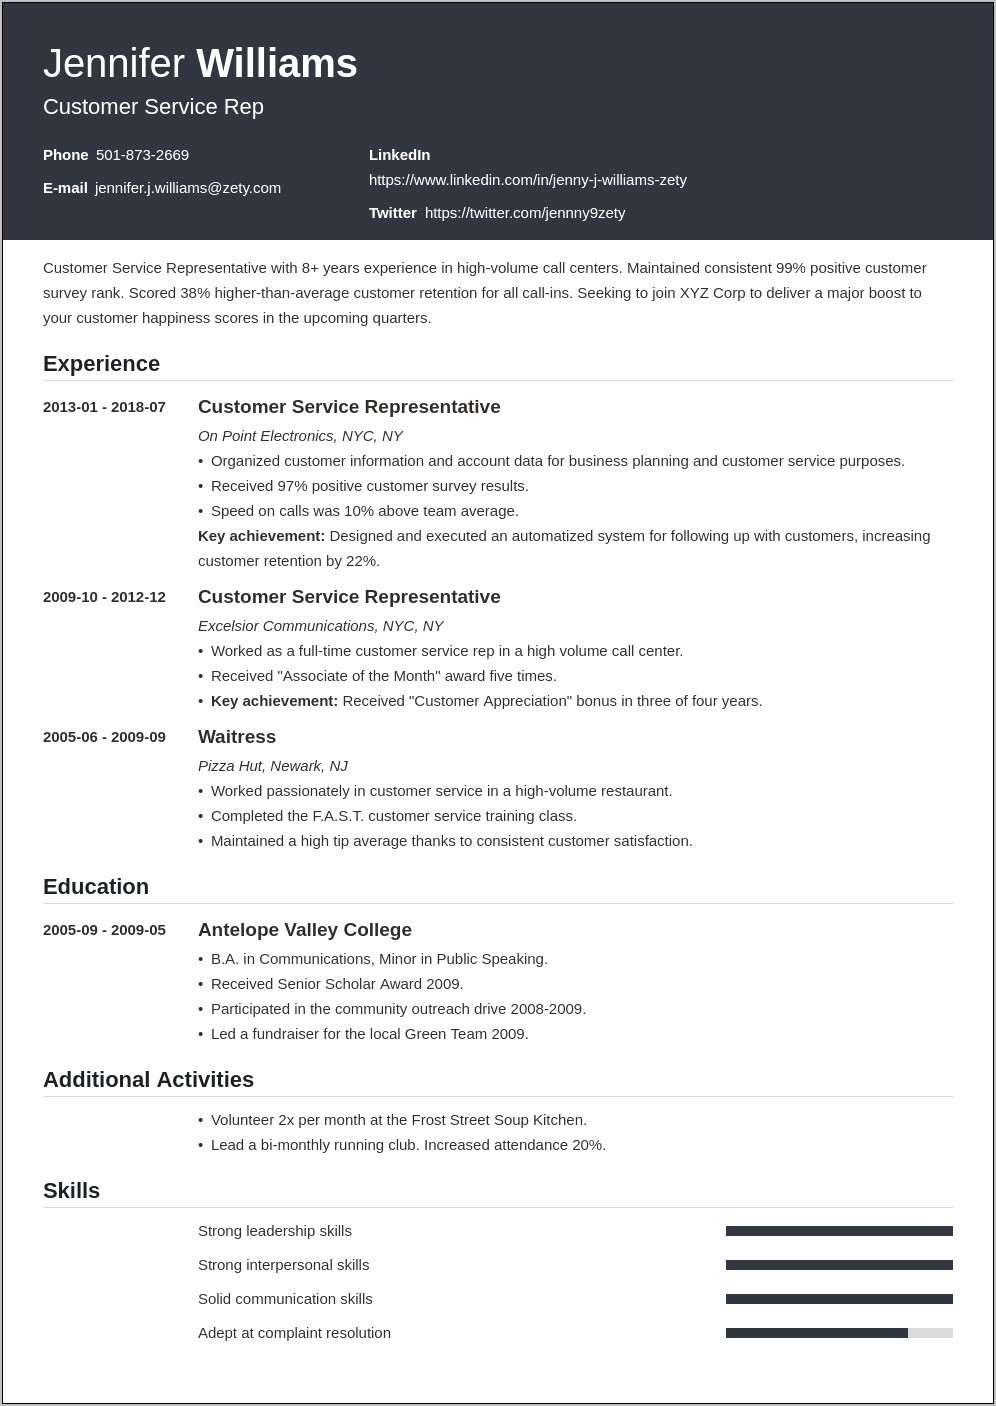 Should I List Experience Details On My Resume